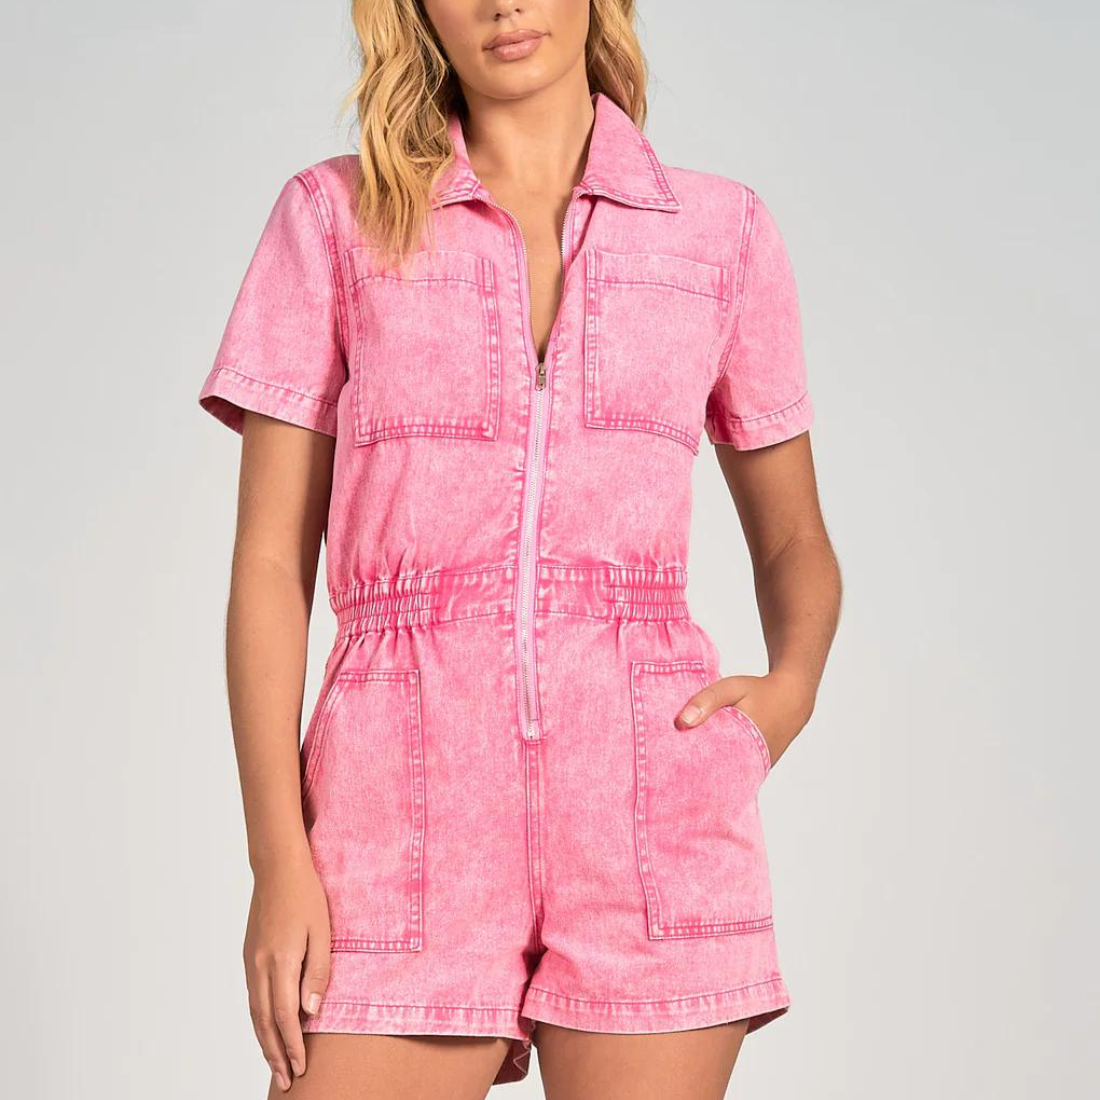 shop jumpsuits and rompers for spring at bliss knoxville